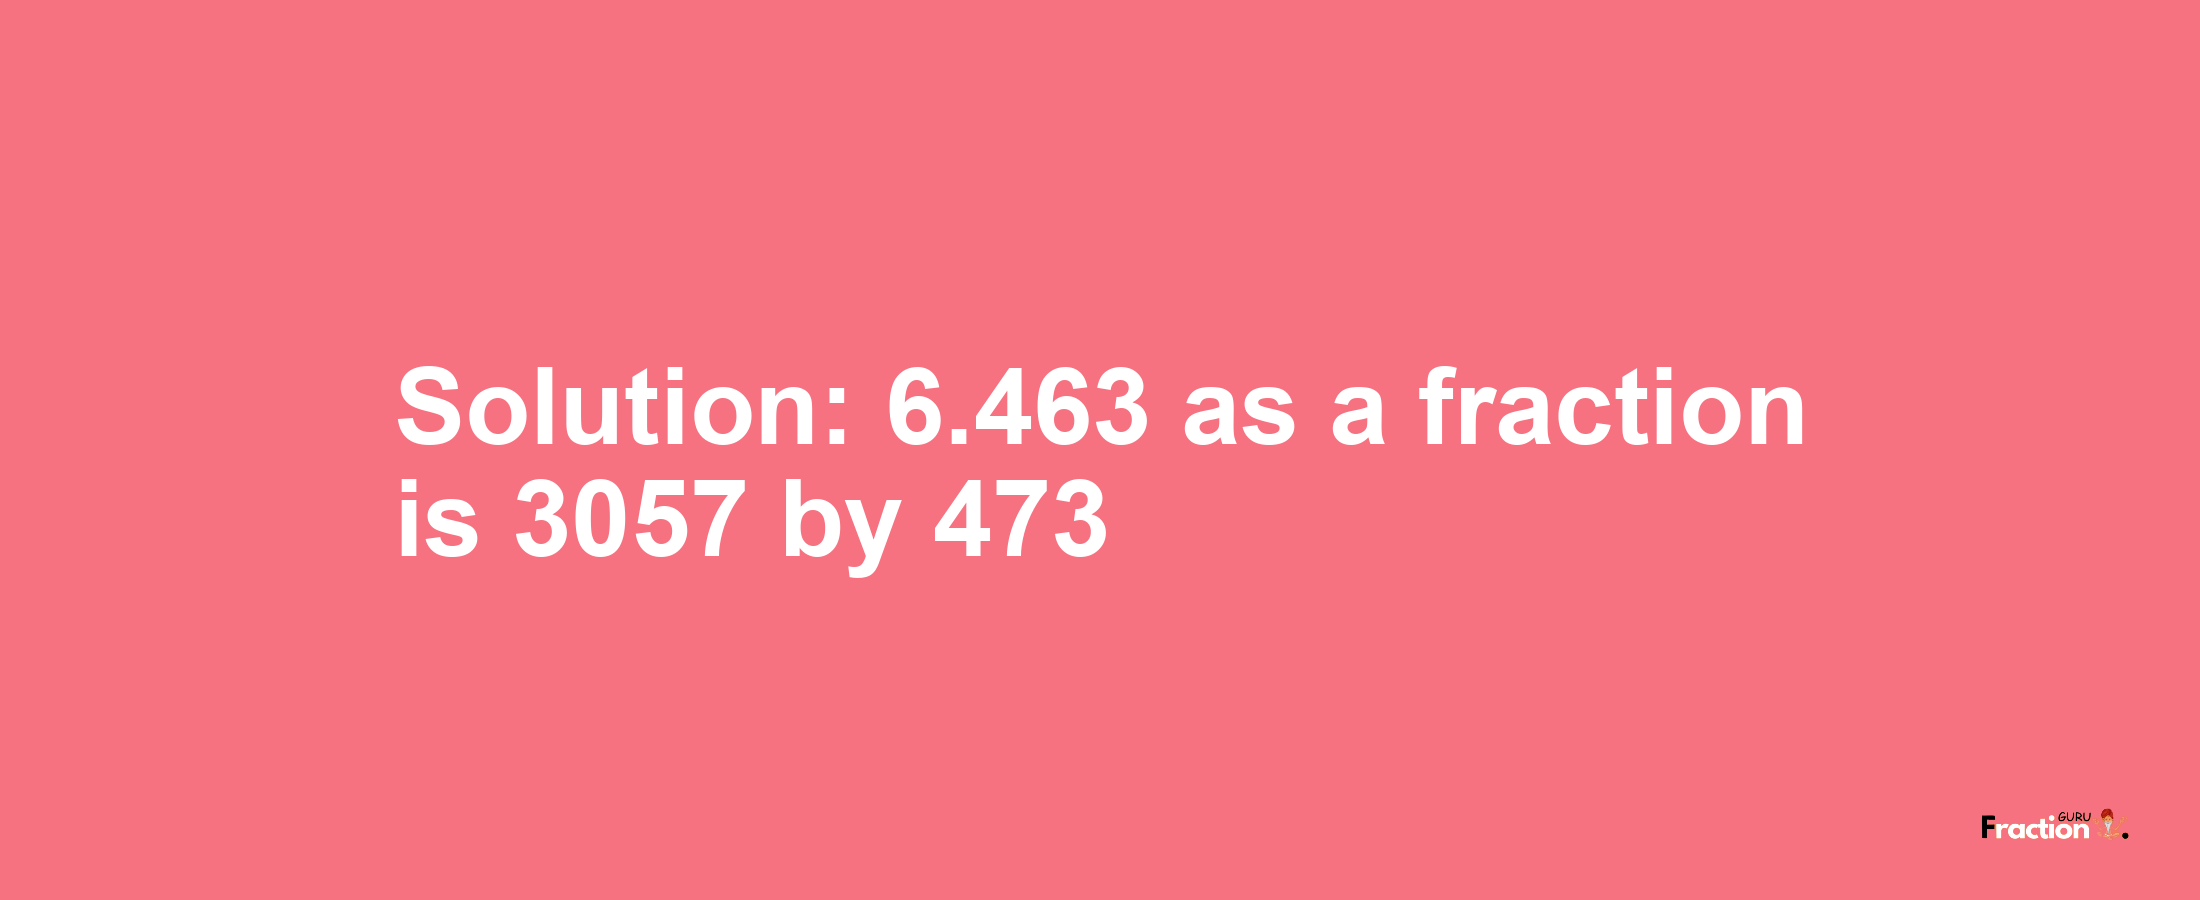 Solution:6.463 as a fraction is 3057/473